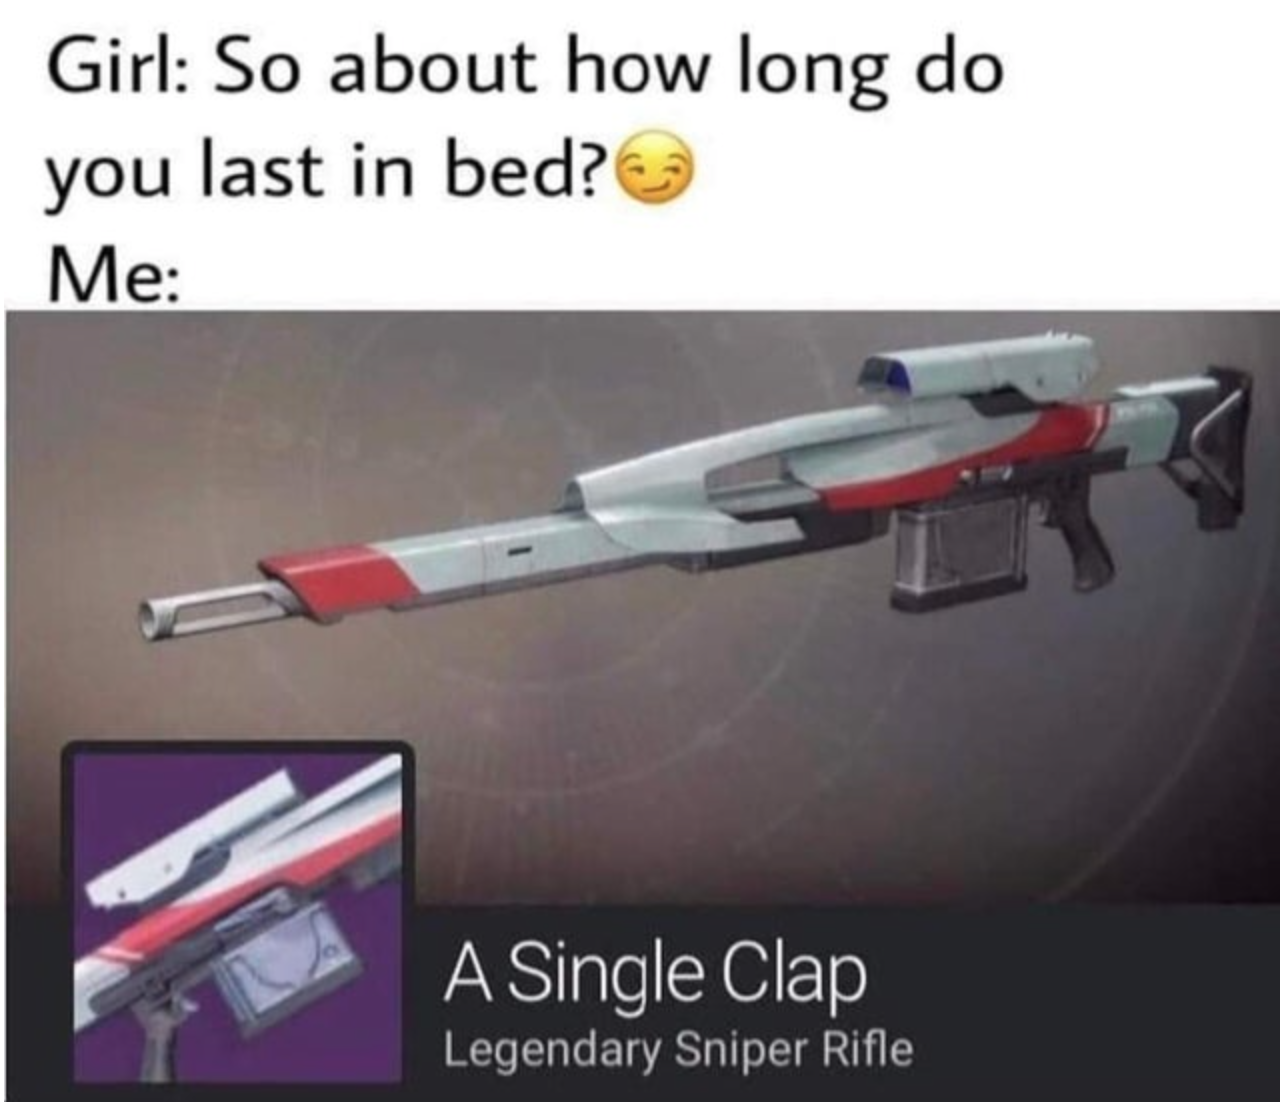 funny gaming memes - destiny 2 a single clap meme - Girl So about how long do you last in bed? Me A Single Clap Legendary Sniper Rifle